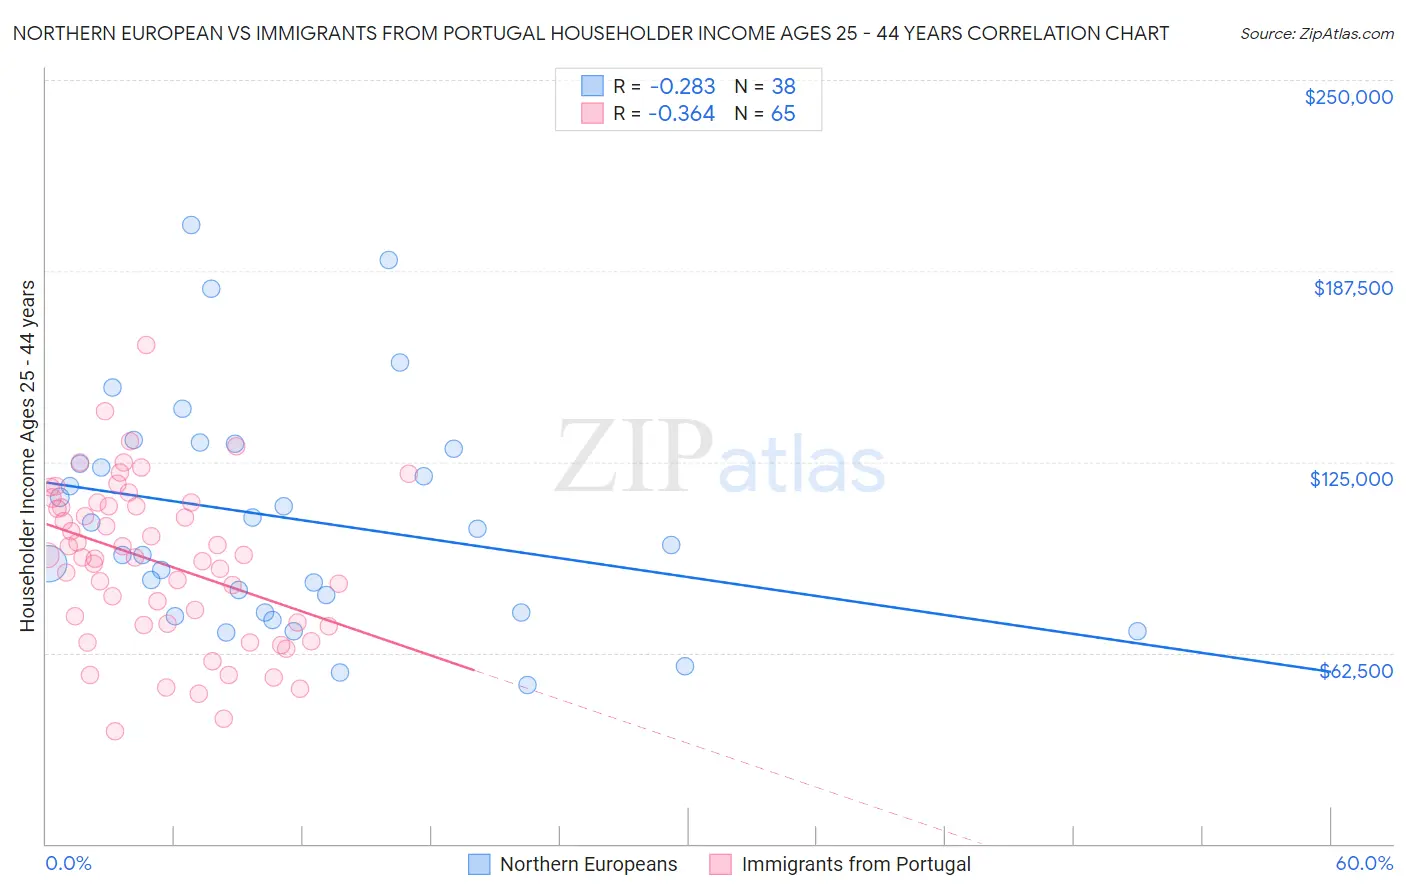 Northern European vs Immigrants from Portugal Householder Income Ages 25 - 44 years